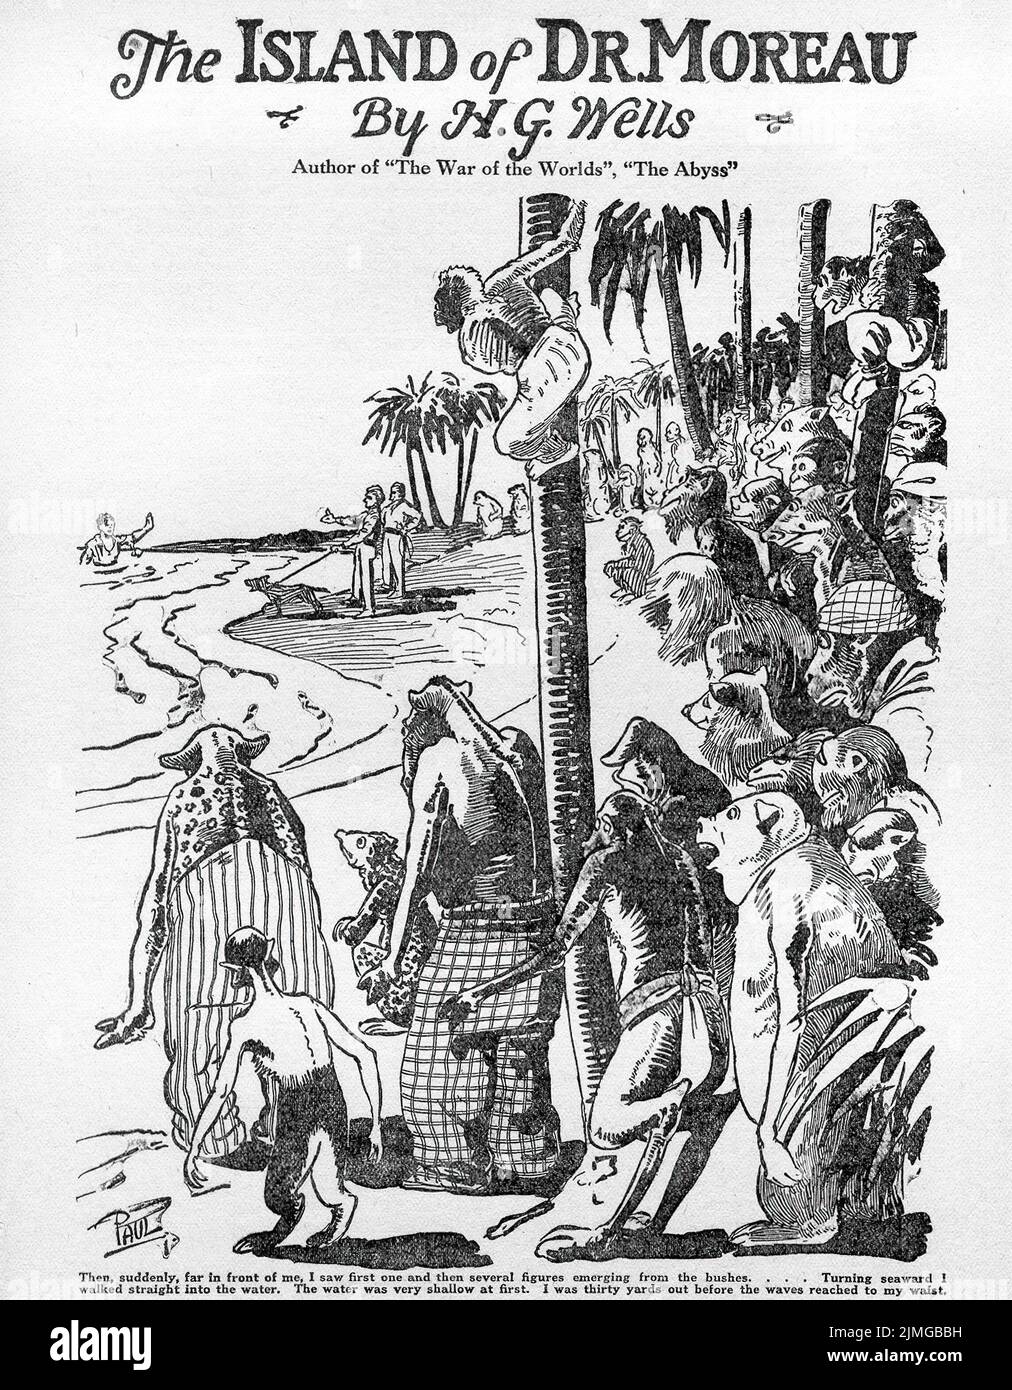 The Island of Dr. Moreau (1896) by H. G. Wells. Illustration by Frank R. Paul from Amazing Stories, October 1926. Stock Photo